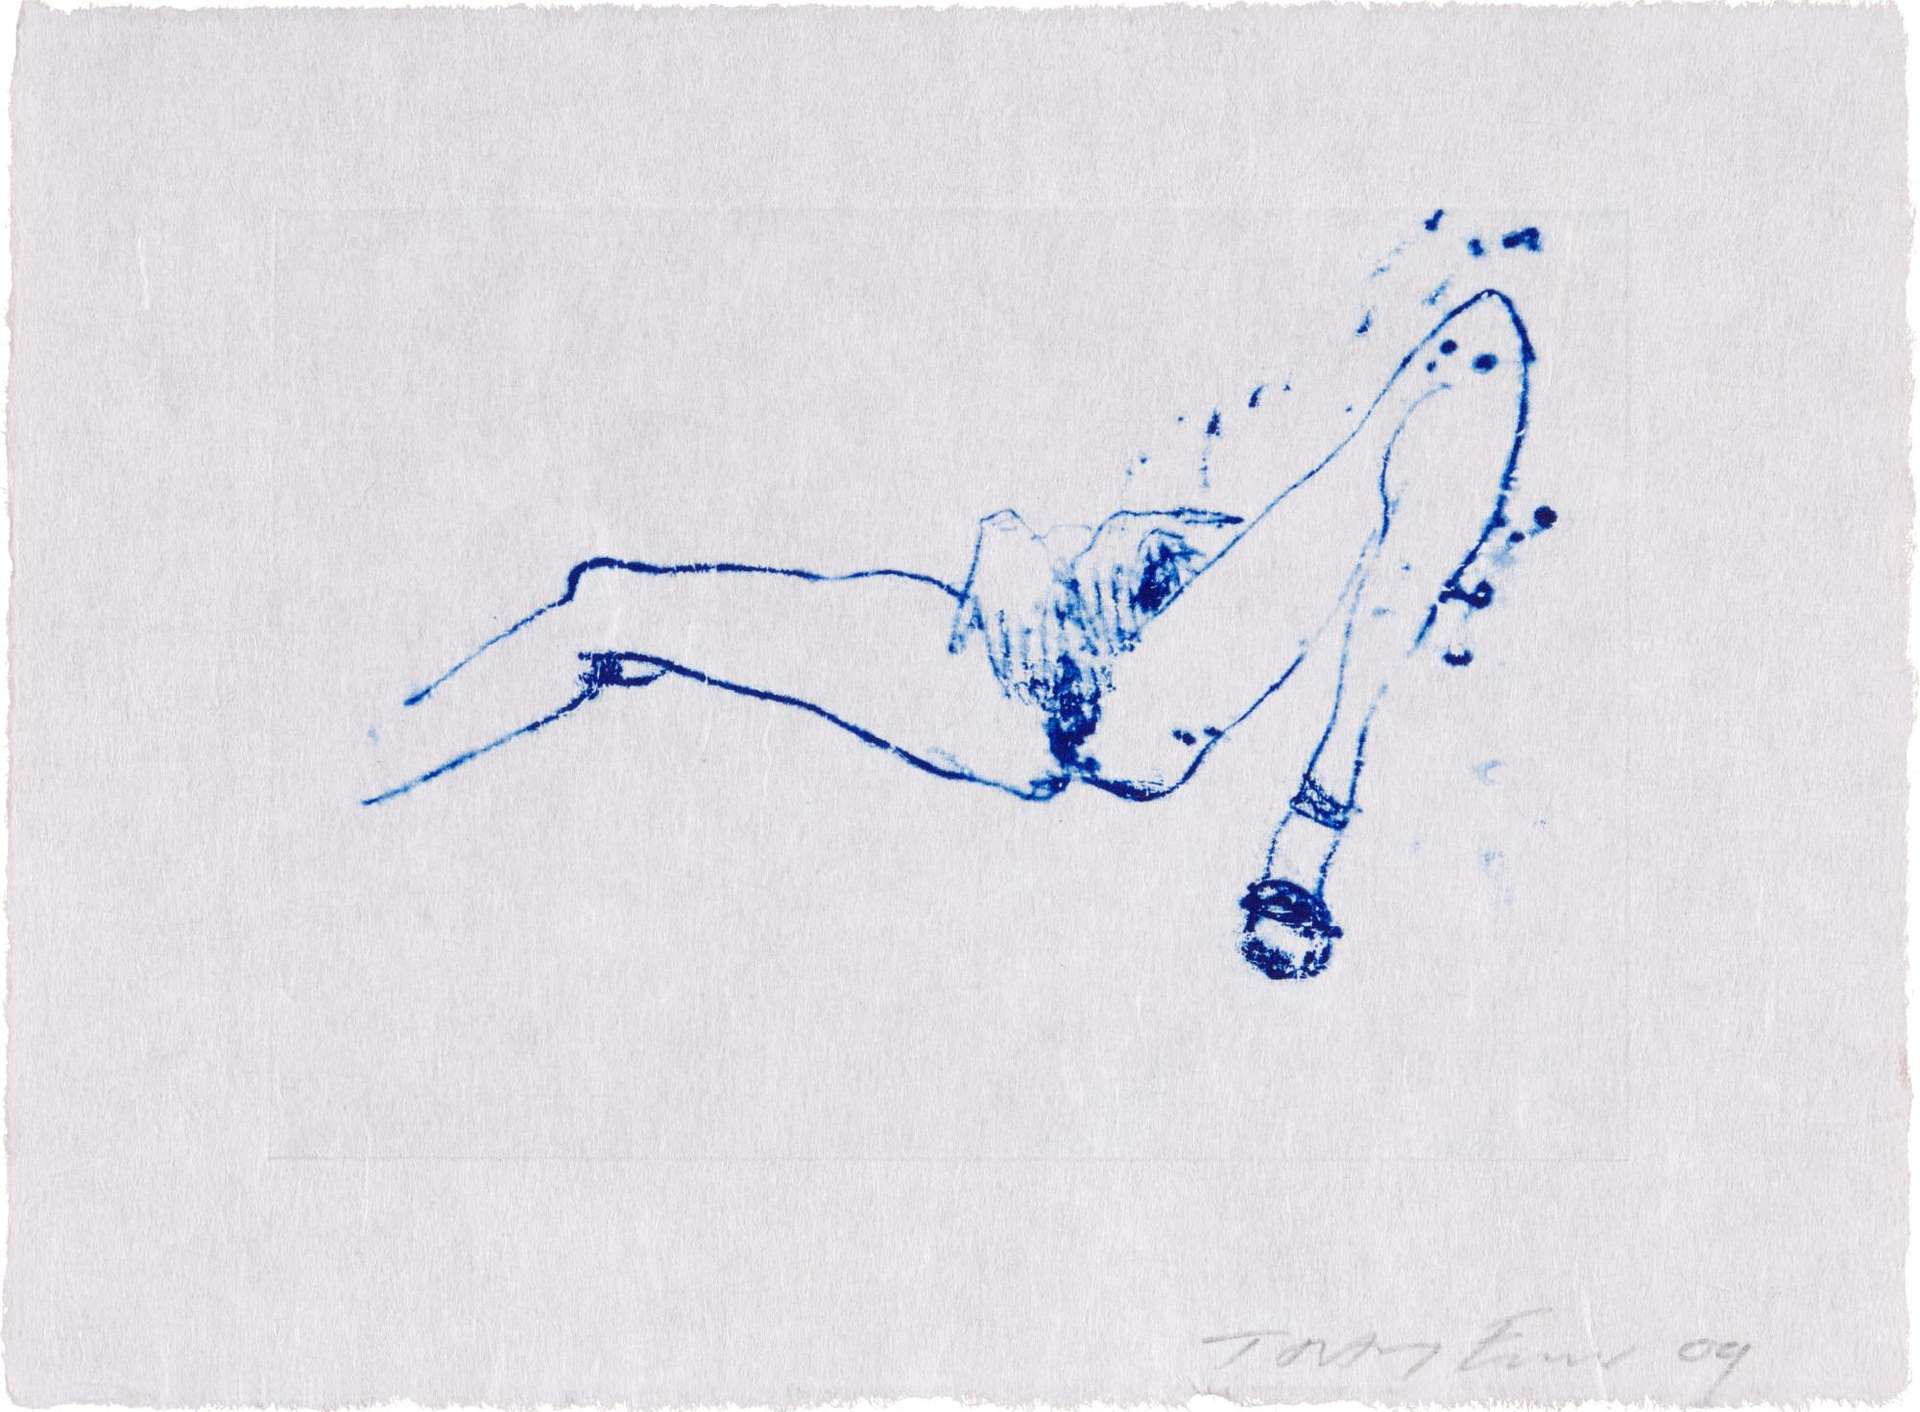 Tracey Emin: Suffer Love - Signed Print